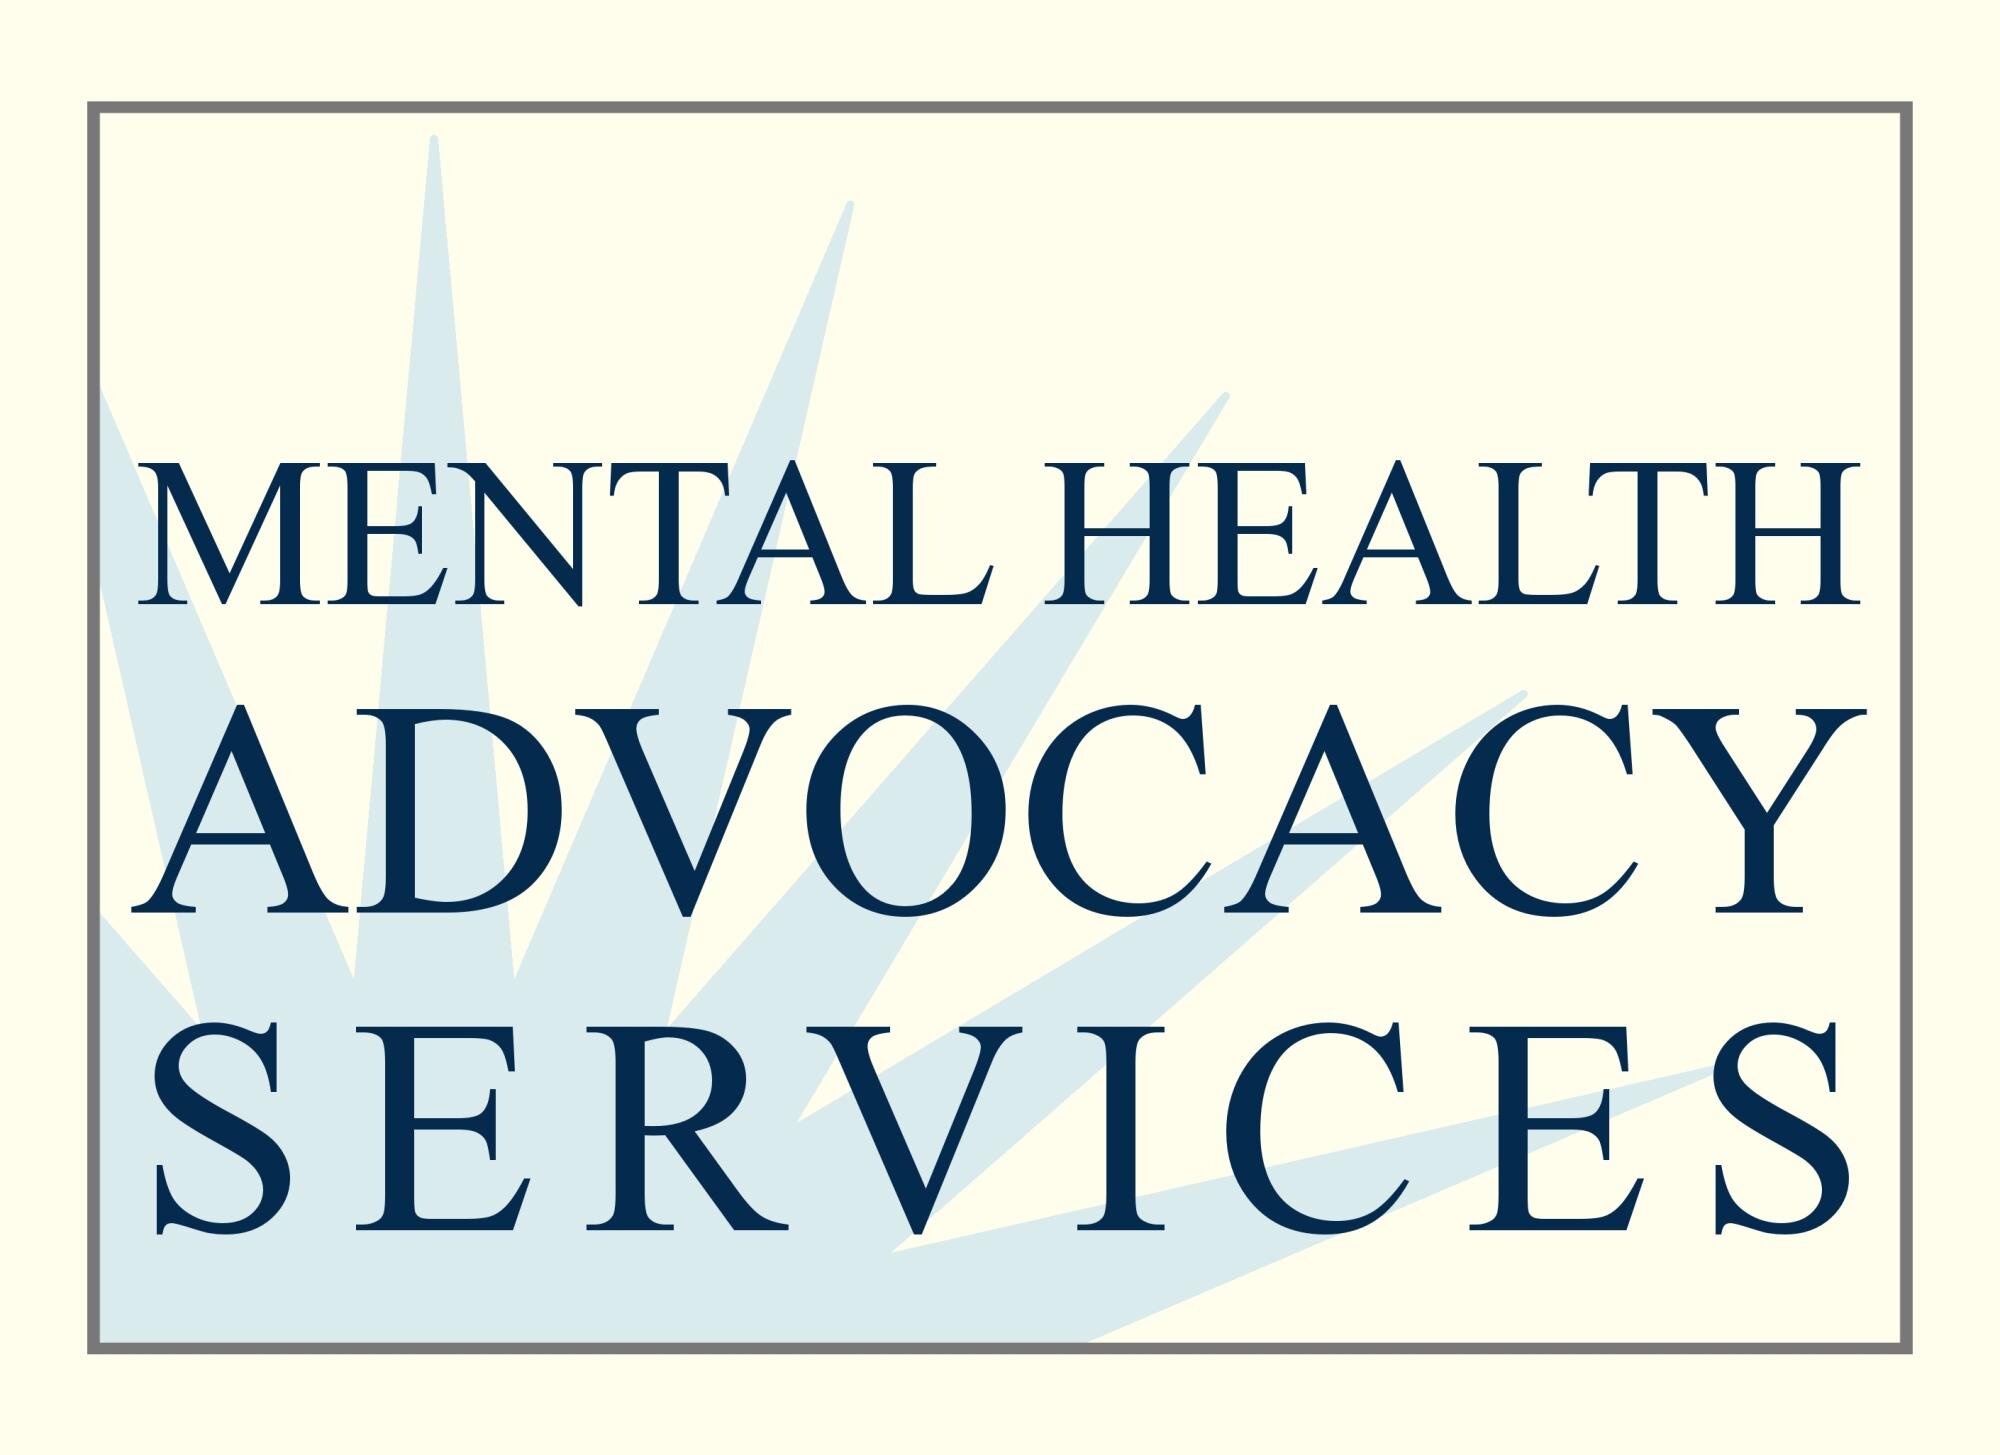 Video — Mental Health Advocacy Services